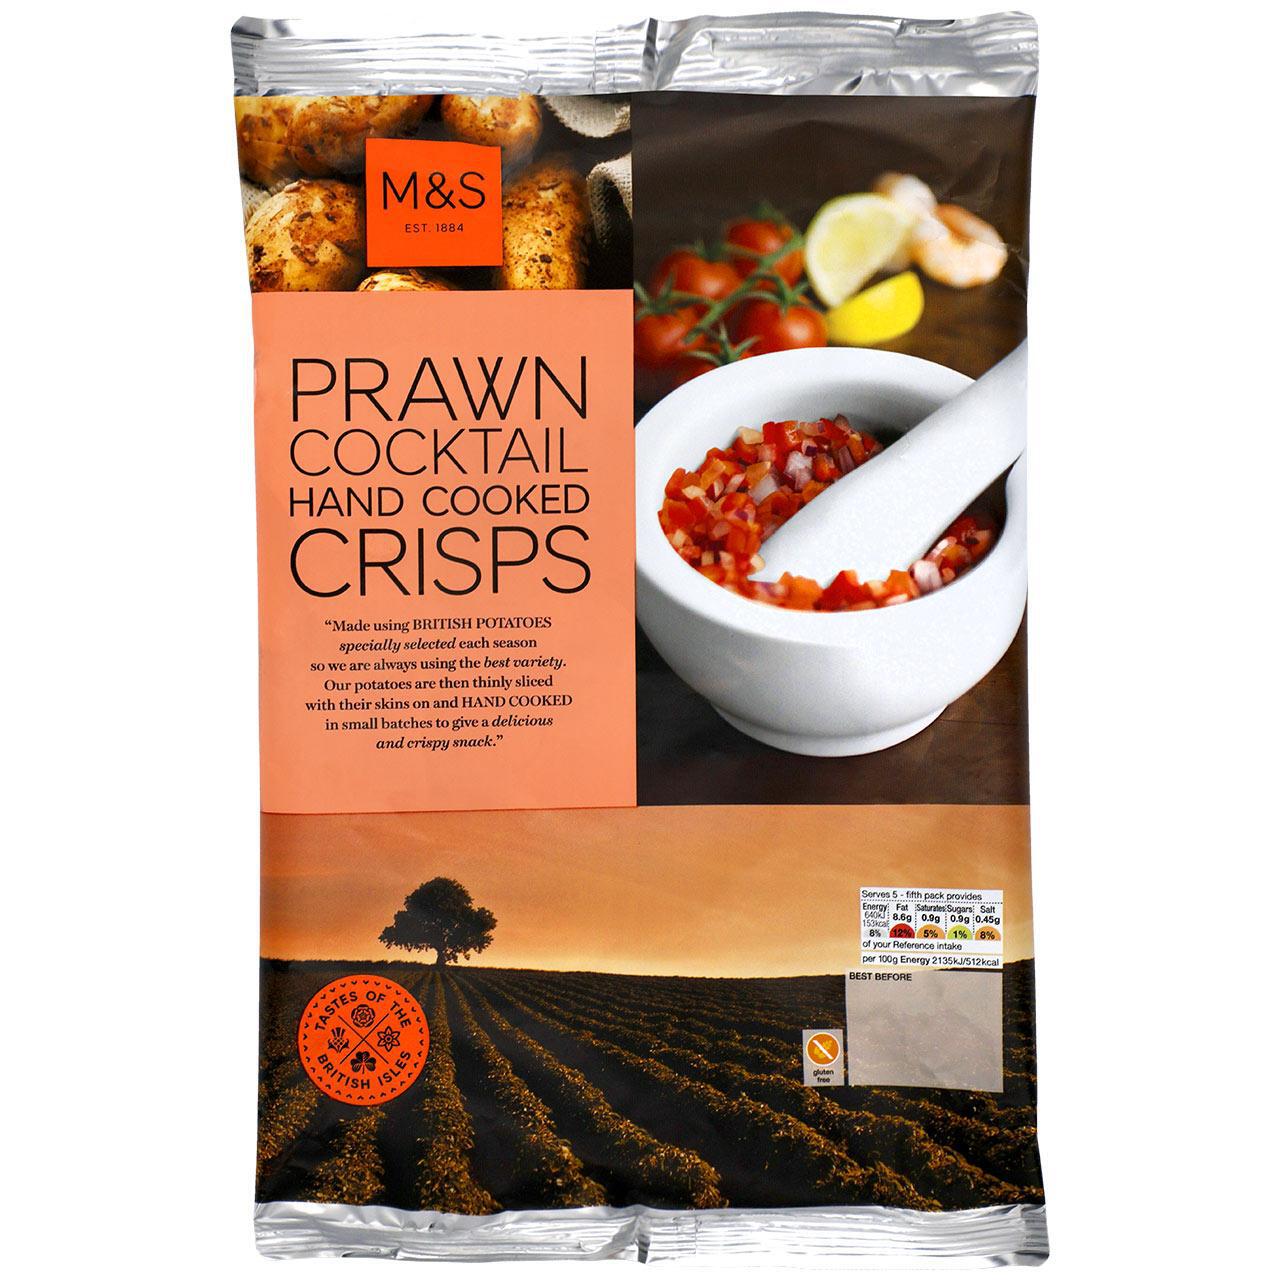 M&S Prawn Cocktail Hand Cooked Crisps 150g